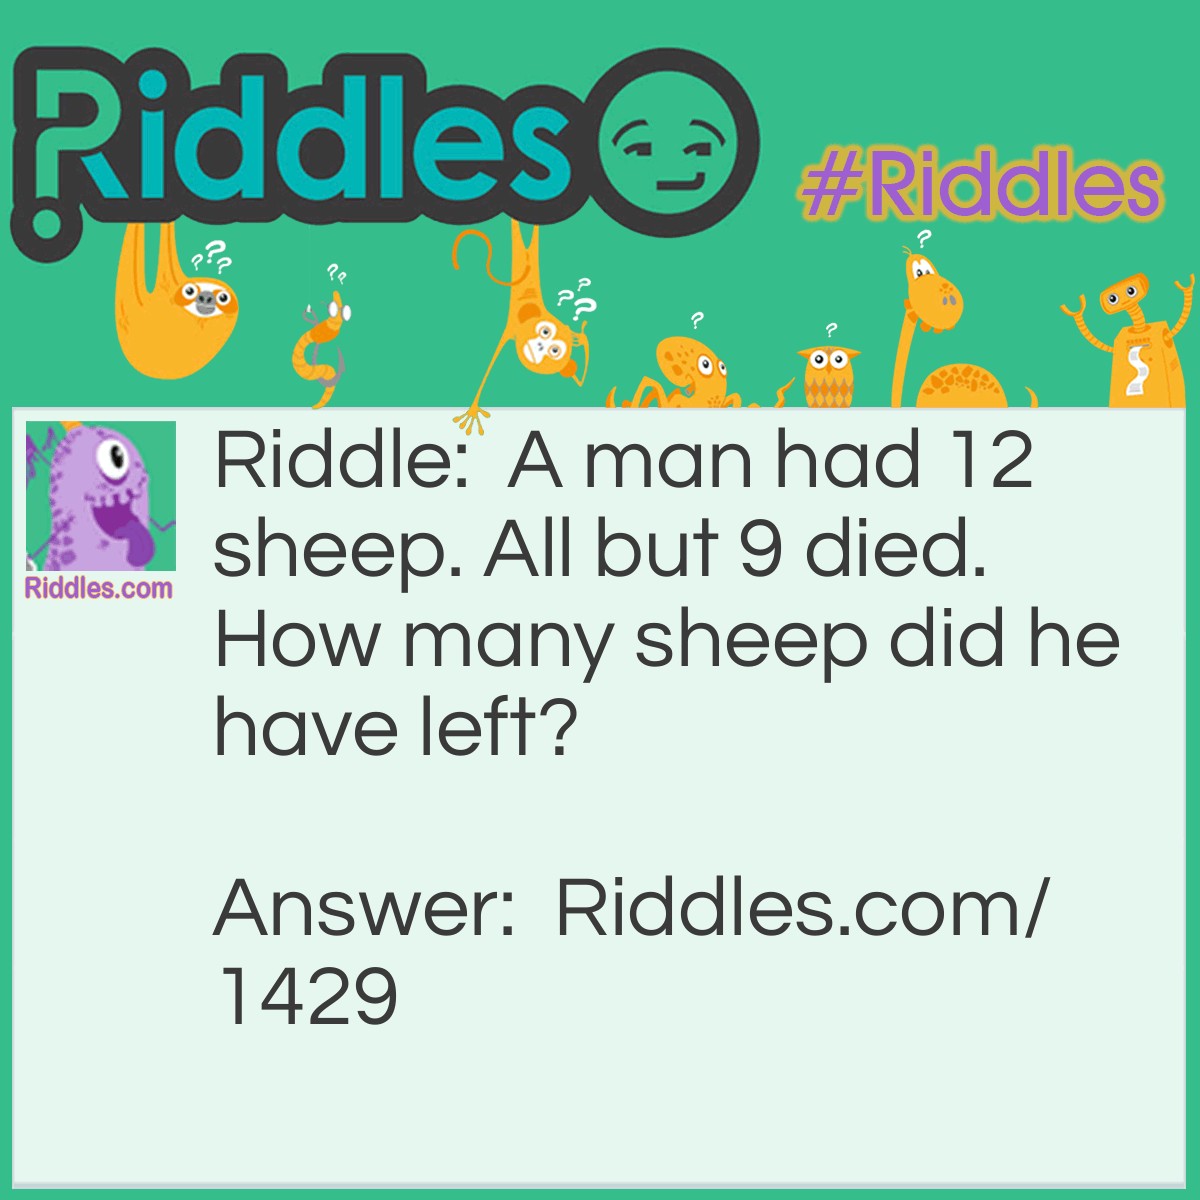 Riddle: A man had 12 sheep. All but 9 died. How many sheep did he have left? Answer: Nine.